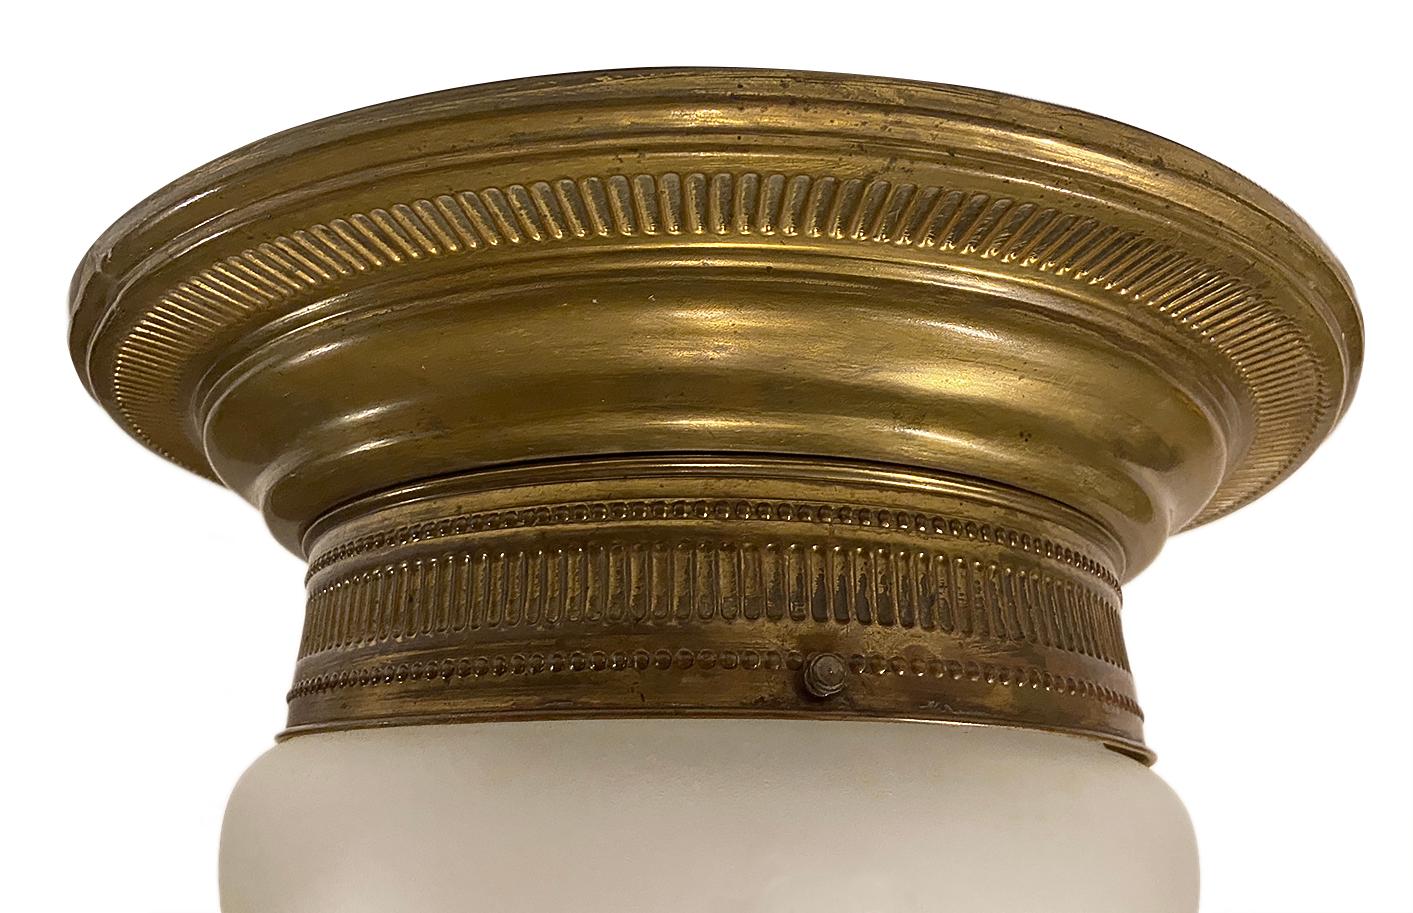 An English circa 1920s repoussé brass flush mounted light fixture with frosted glass inset.

Measurements:
Diameter 15 1/2